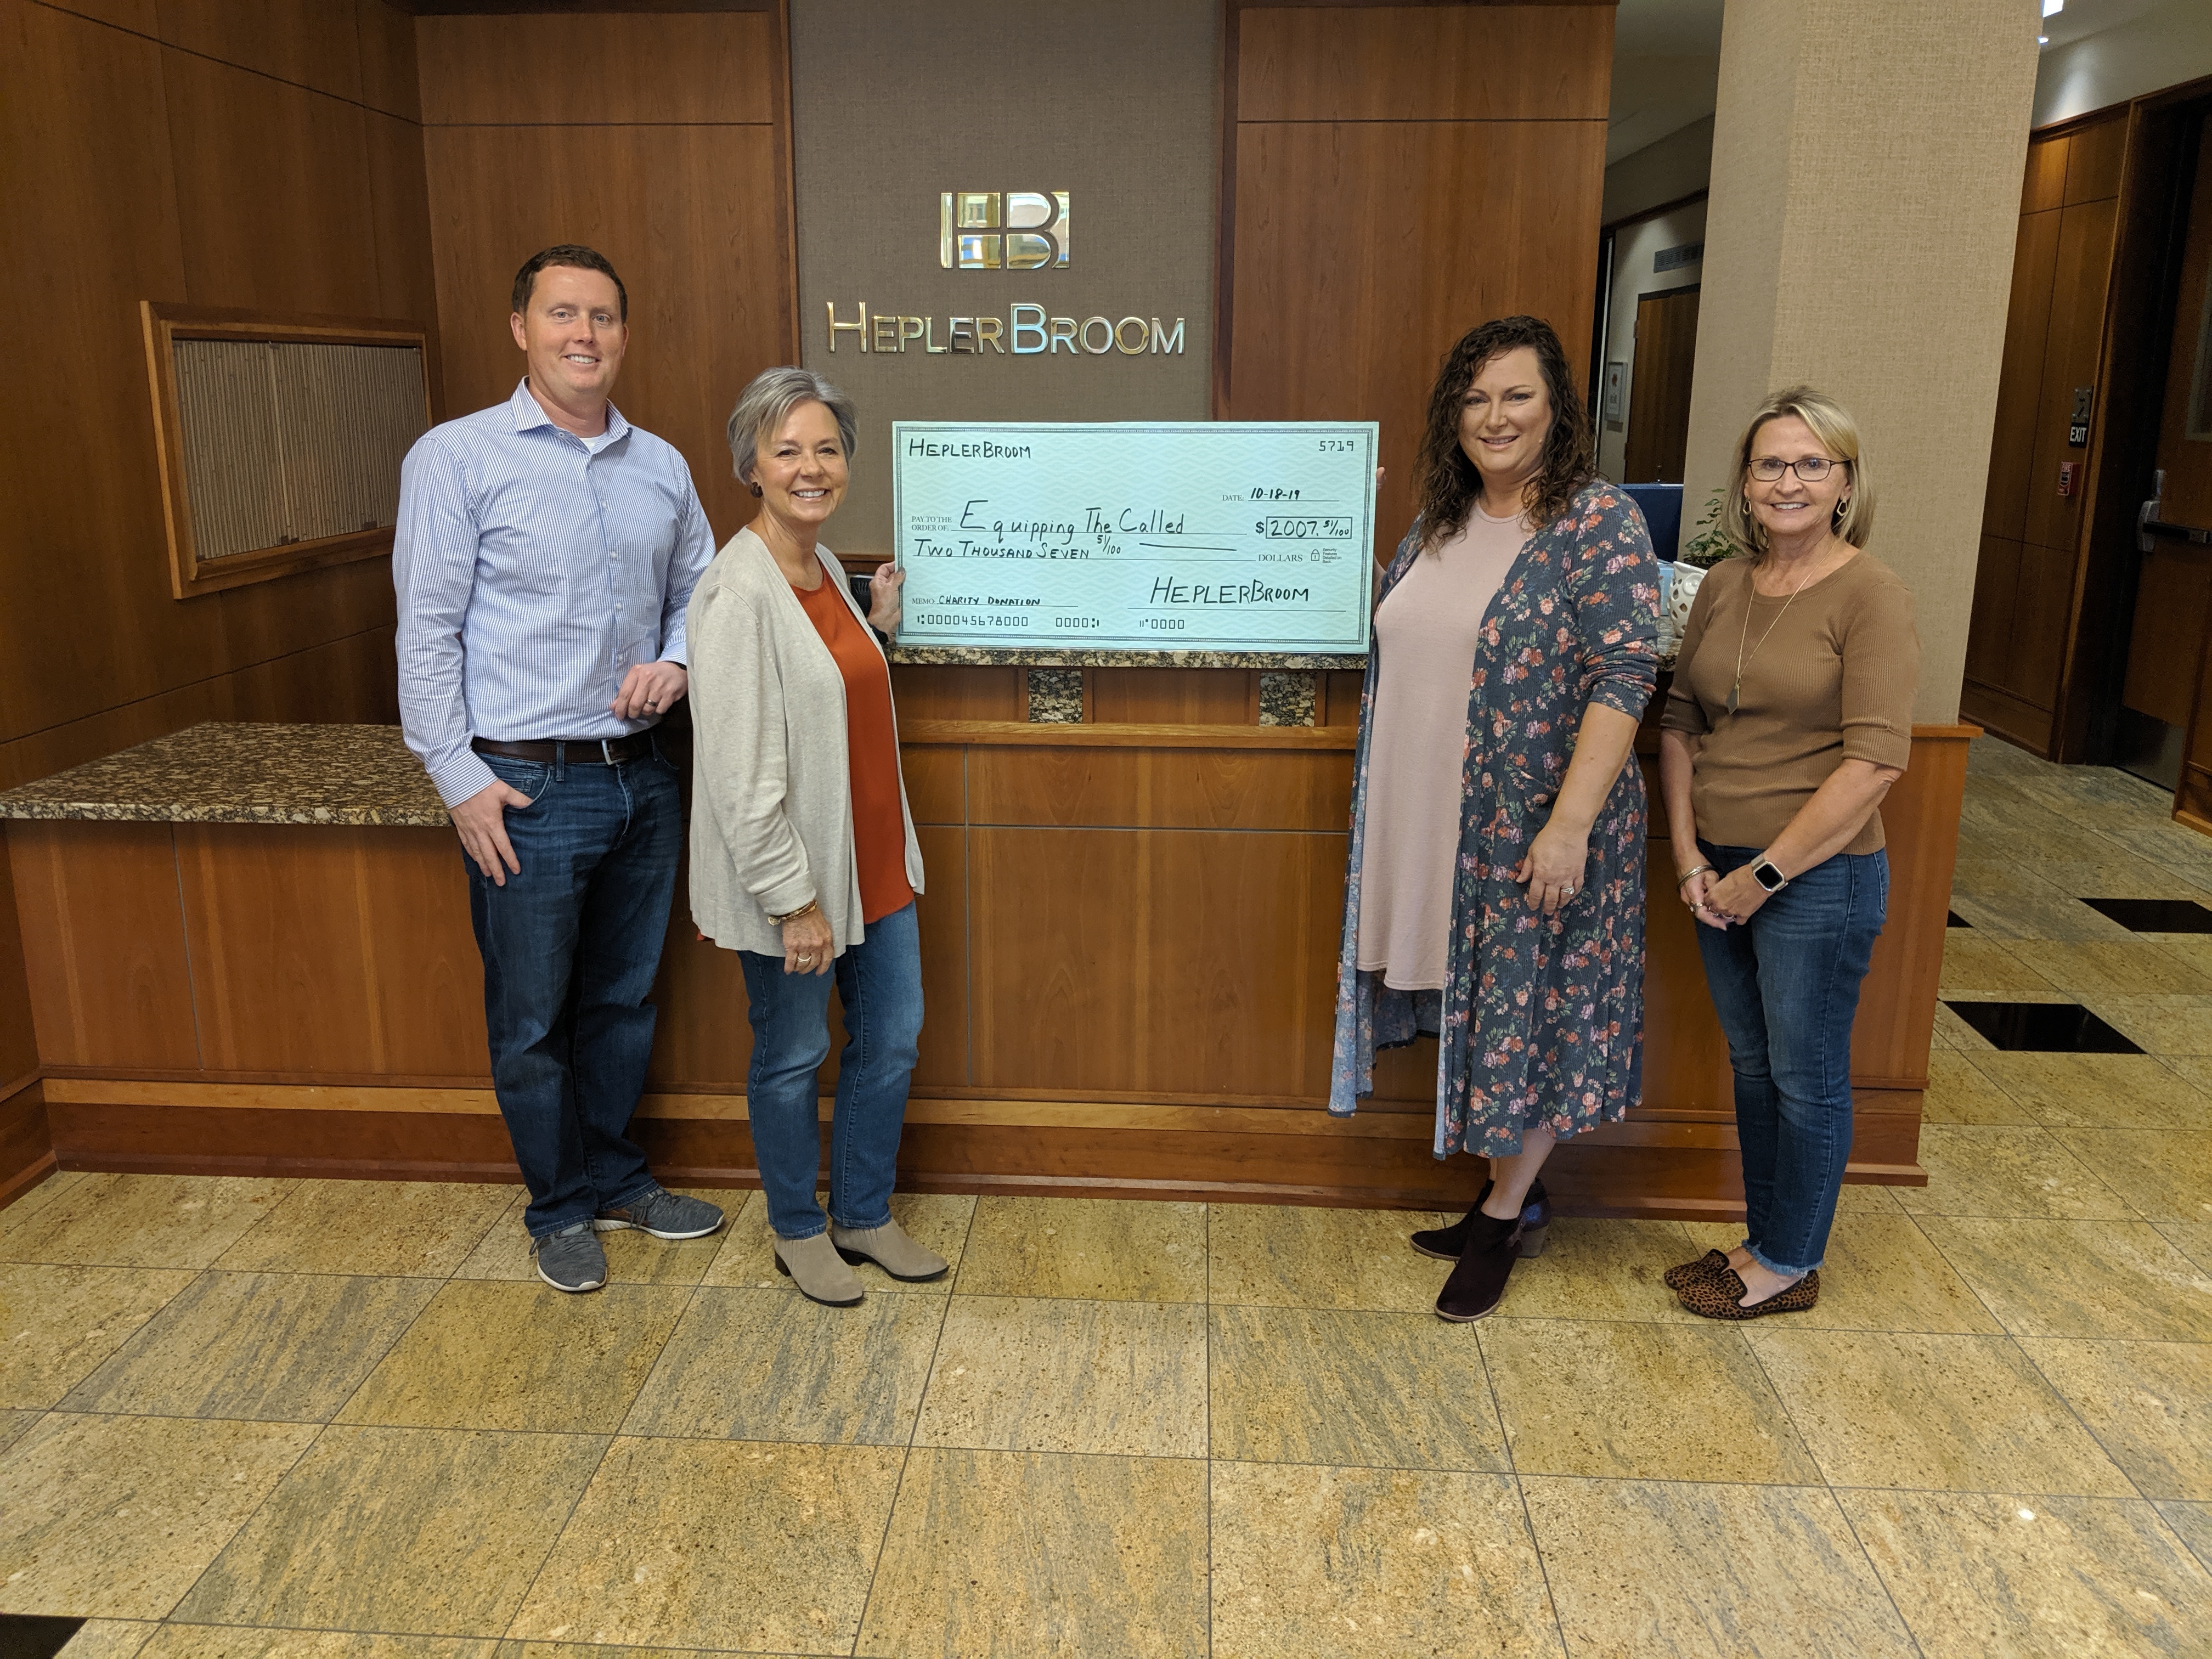 photograph of HeplerBroom attorney Matt Champlin, paralegal Sandy Hammett, and Marketing & Recruiting Coordinator Jody Robbs presenting check to Julie Tracy, co-founder of Equipping the Called